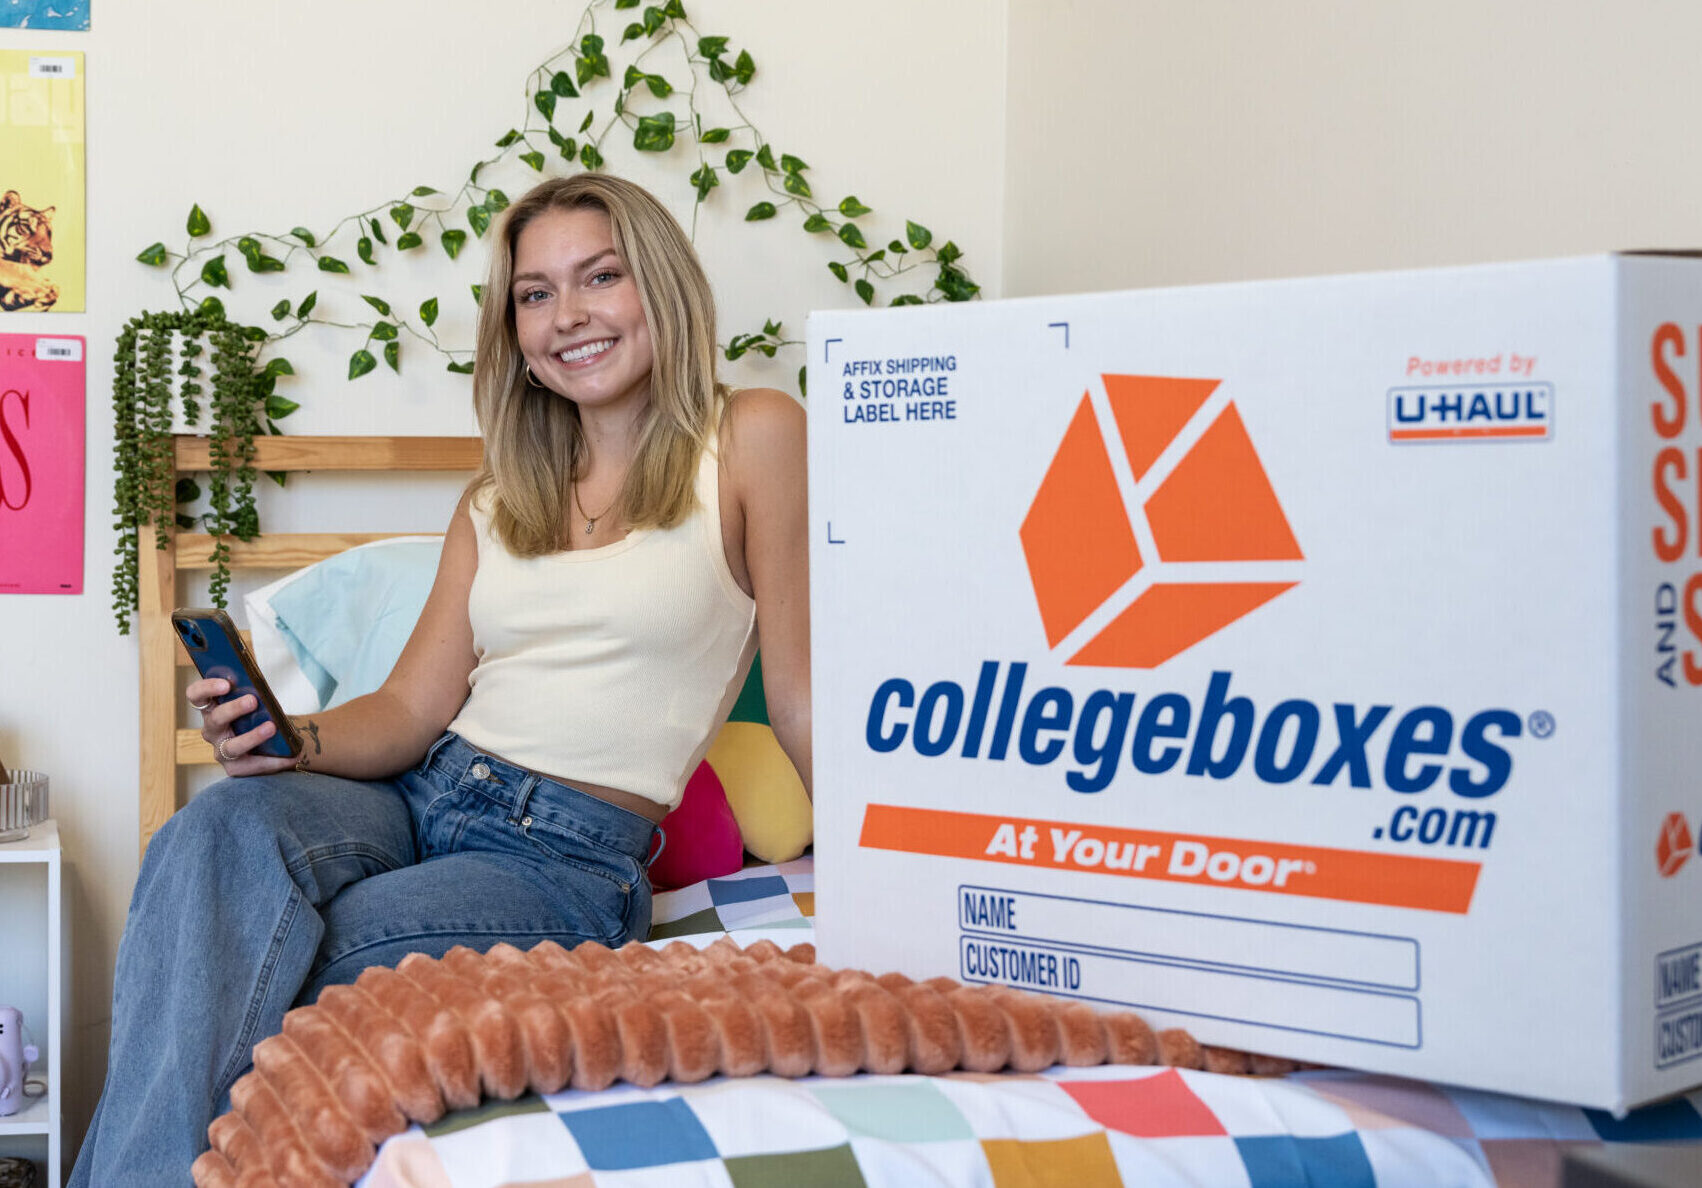 Photo of a student in their dorm room with Collegeboxes branded boxes around the room.